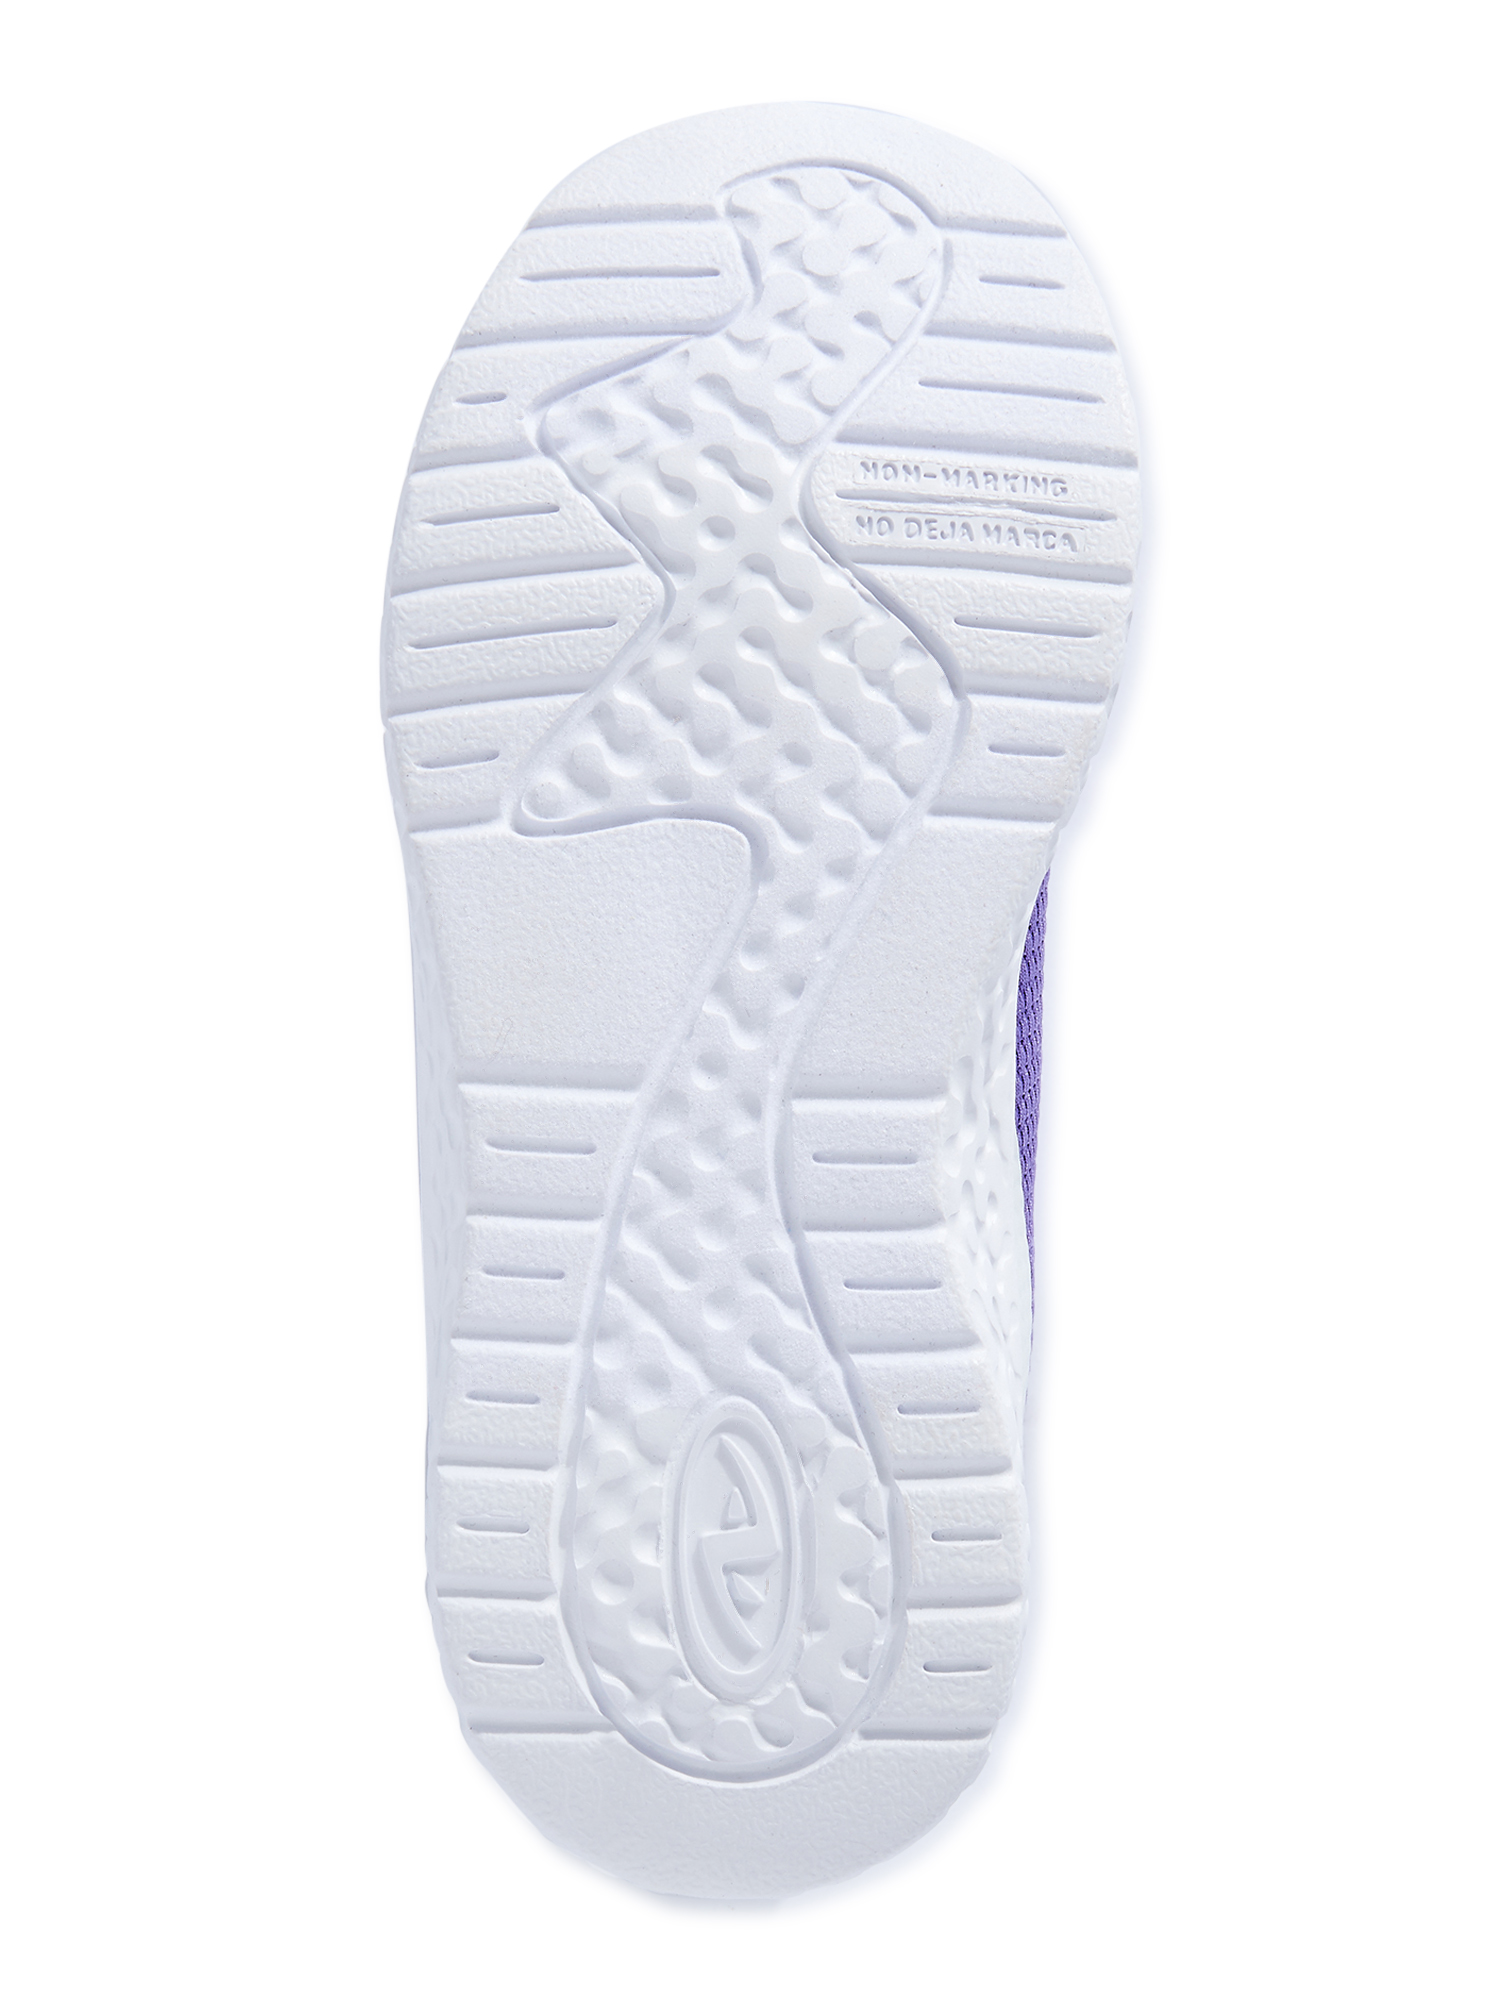 Athletic Works Core Lightweight Athletic Sneaker (Little Girls & Big Girls) - image 3 of 6